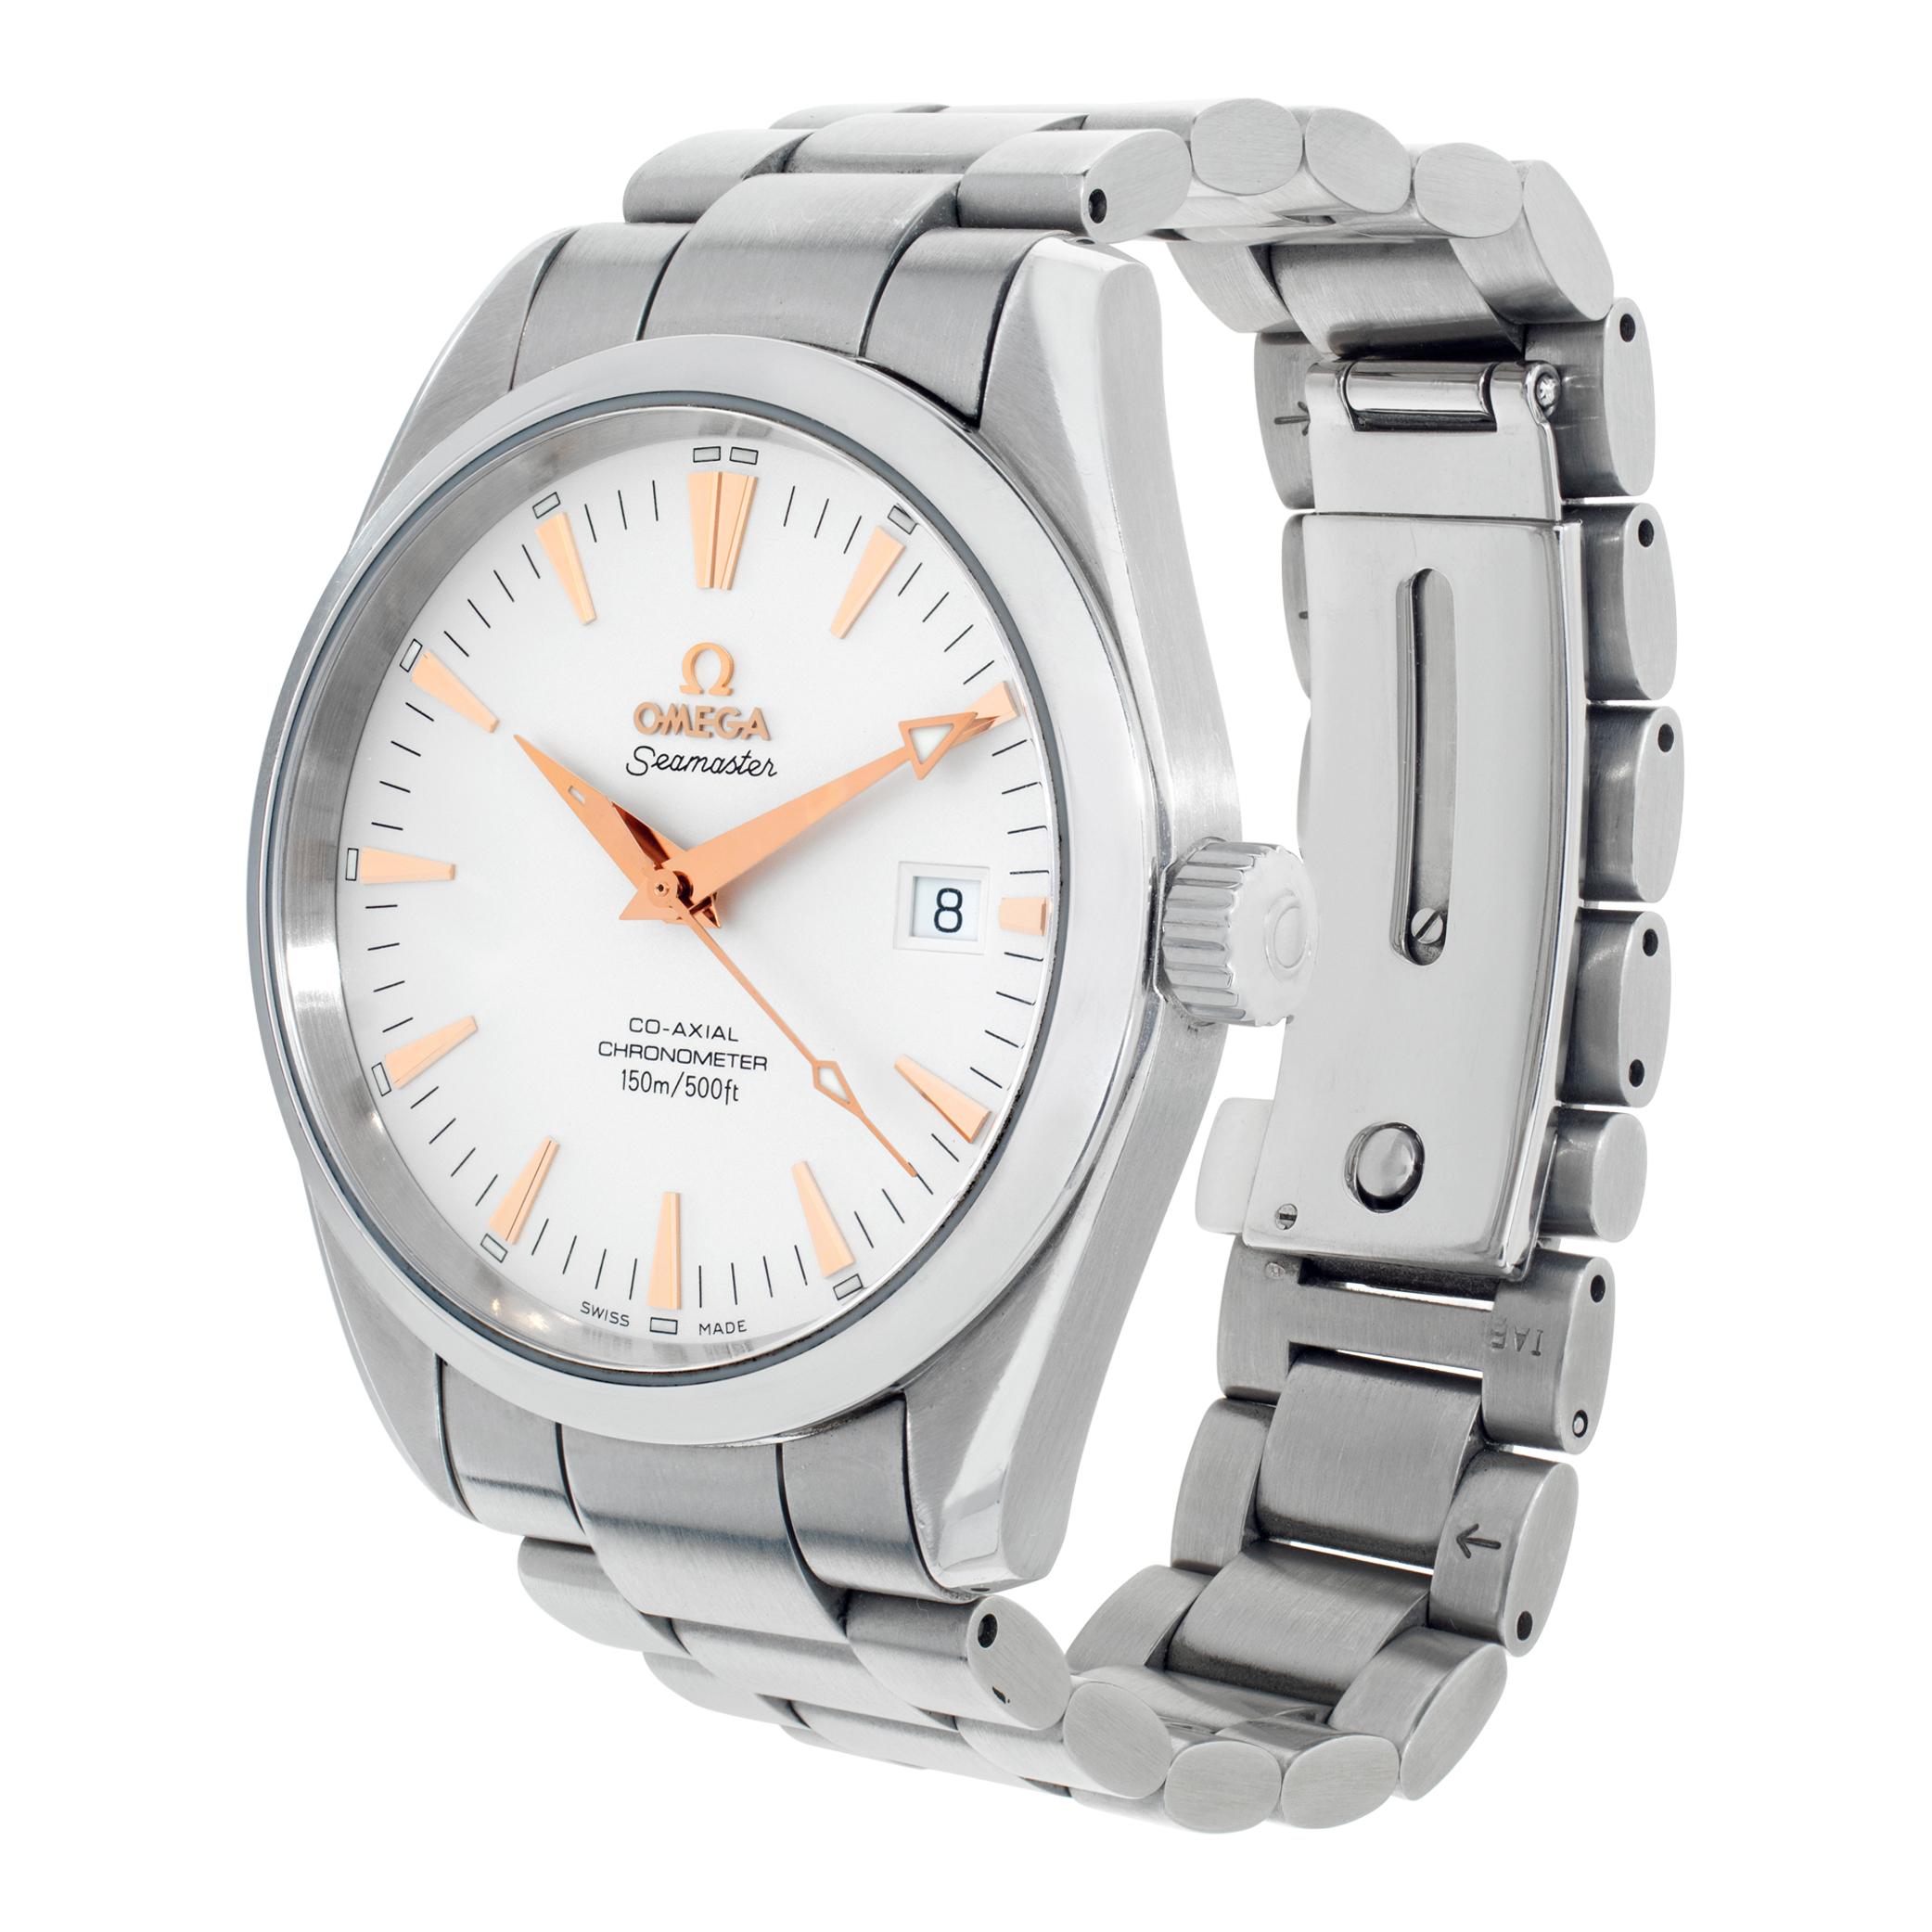 Omega Seamaster Aqua Terra in stainless steel. Auto w/ sweep seconds and date. 39 mm case size. With box. Ref 2503.34.00. Circa 2010s. Fine Pre-owned Omega Watch. Certified preowned Sport Omega Seamaster Aqua Terra 2503.34.00 watch is made out of